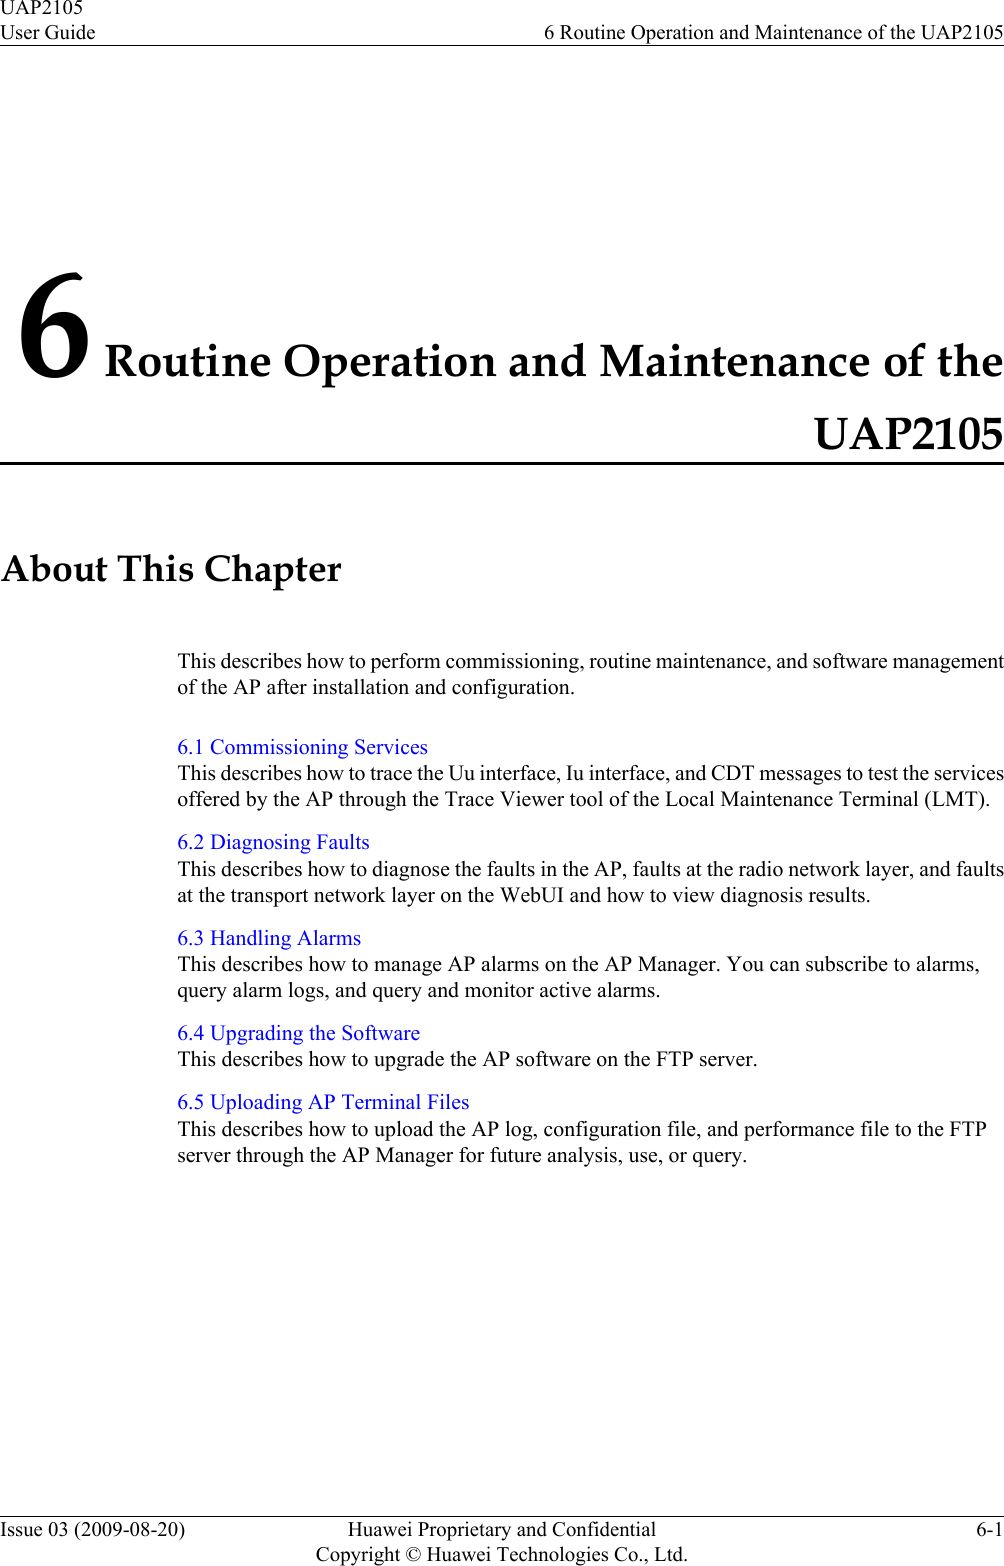 6 Routine Operation and Maintenance of theUAP2105About This ChapterThis describes how to perform commissioning, routine maintenance, and software managementof the AP after installation and configuration.6.1 Commissioning ServicesThis describes how to trace the Uu interface, Iu interface, and CDT messages to test the servicesoffered by the AP through the Trace Viewer tool of the Local Maintenance Terminal (LMT).6.2 Diagnosing FaultsThis describes how to diagnose the faults in the AP, faults at the radio network layer, and faultsat the transport network layer on the WebUI and how to view diagnosis results.6.3 Handling AlarmsThis describes how to manage AP alarms on the AP Manager. You can subscribe to alarms,query alarm logs, and query and monitor active alarms.6.4 Upgrading the SoftwareThis describes how to upgrade the AP software on the FTP server.6.5 Uploading AP Terminal FilesThis describes how to upload the AP log, configuration file, and performance file to the FTPserver through the AP Manager for future analysis, use, or query.UAP2105User Guide 6 Routine Operation and Maintenance of the UAP2105Issue 03 (2009-08-20) Huawei Proprietary and ConfidentialCopyright © Huawei Technologies Co., Ltd.6-1